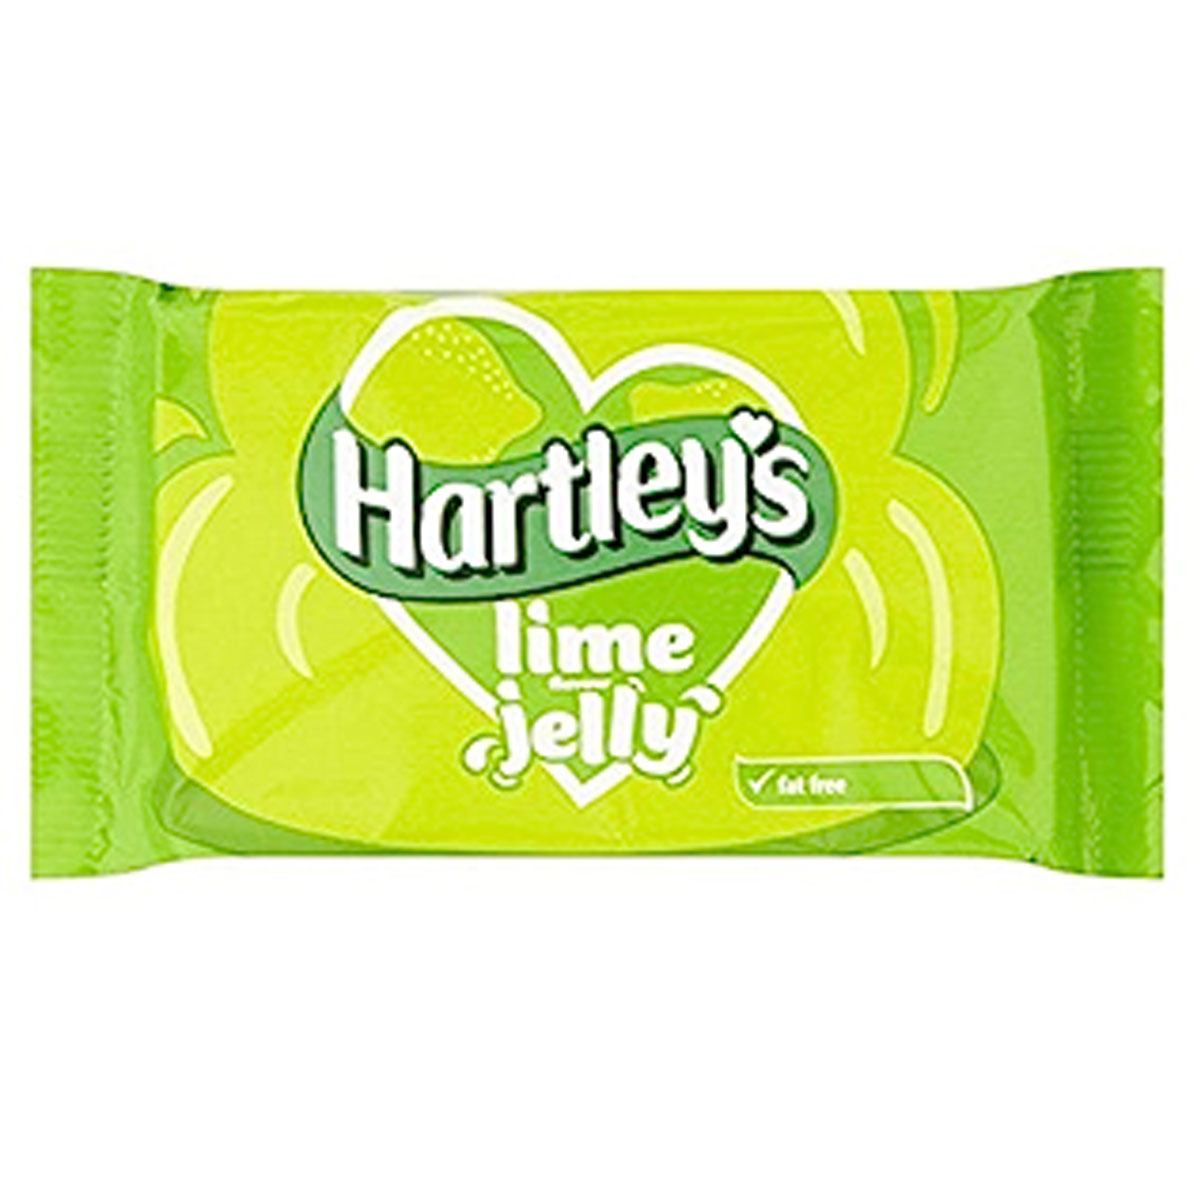 Hartley's - Jelly Lime Tablet - 135g - Continental Food Store